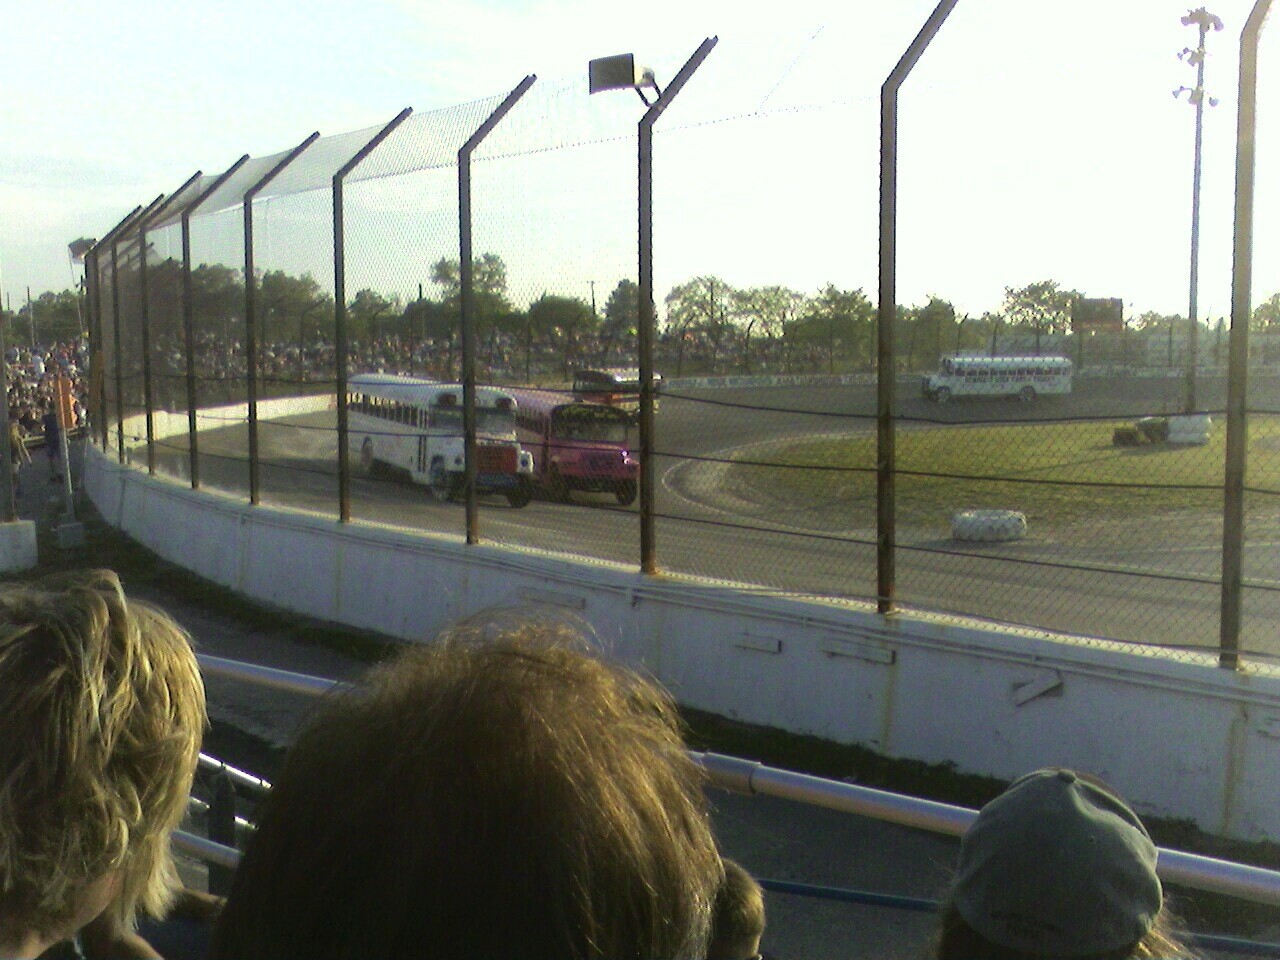 a group of people watching a race at a motor racing track